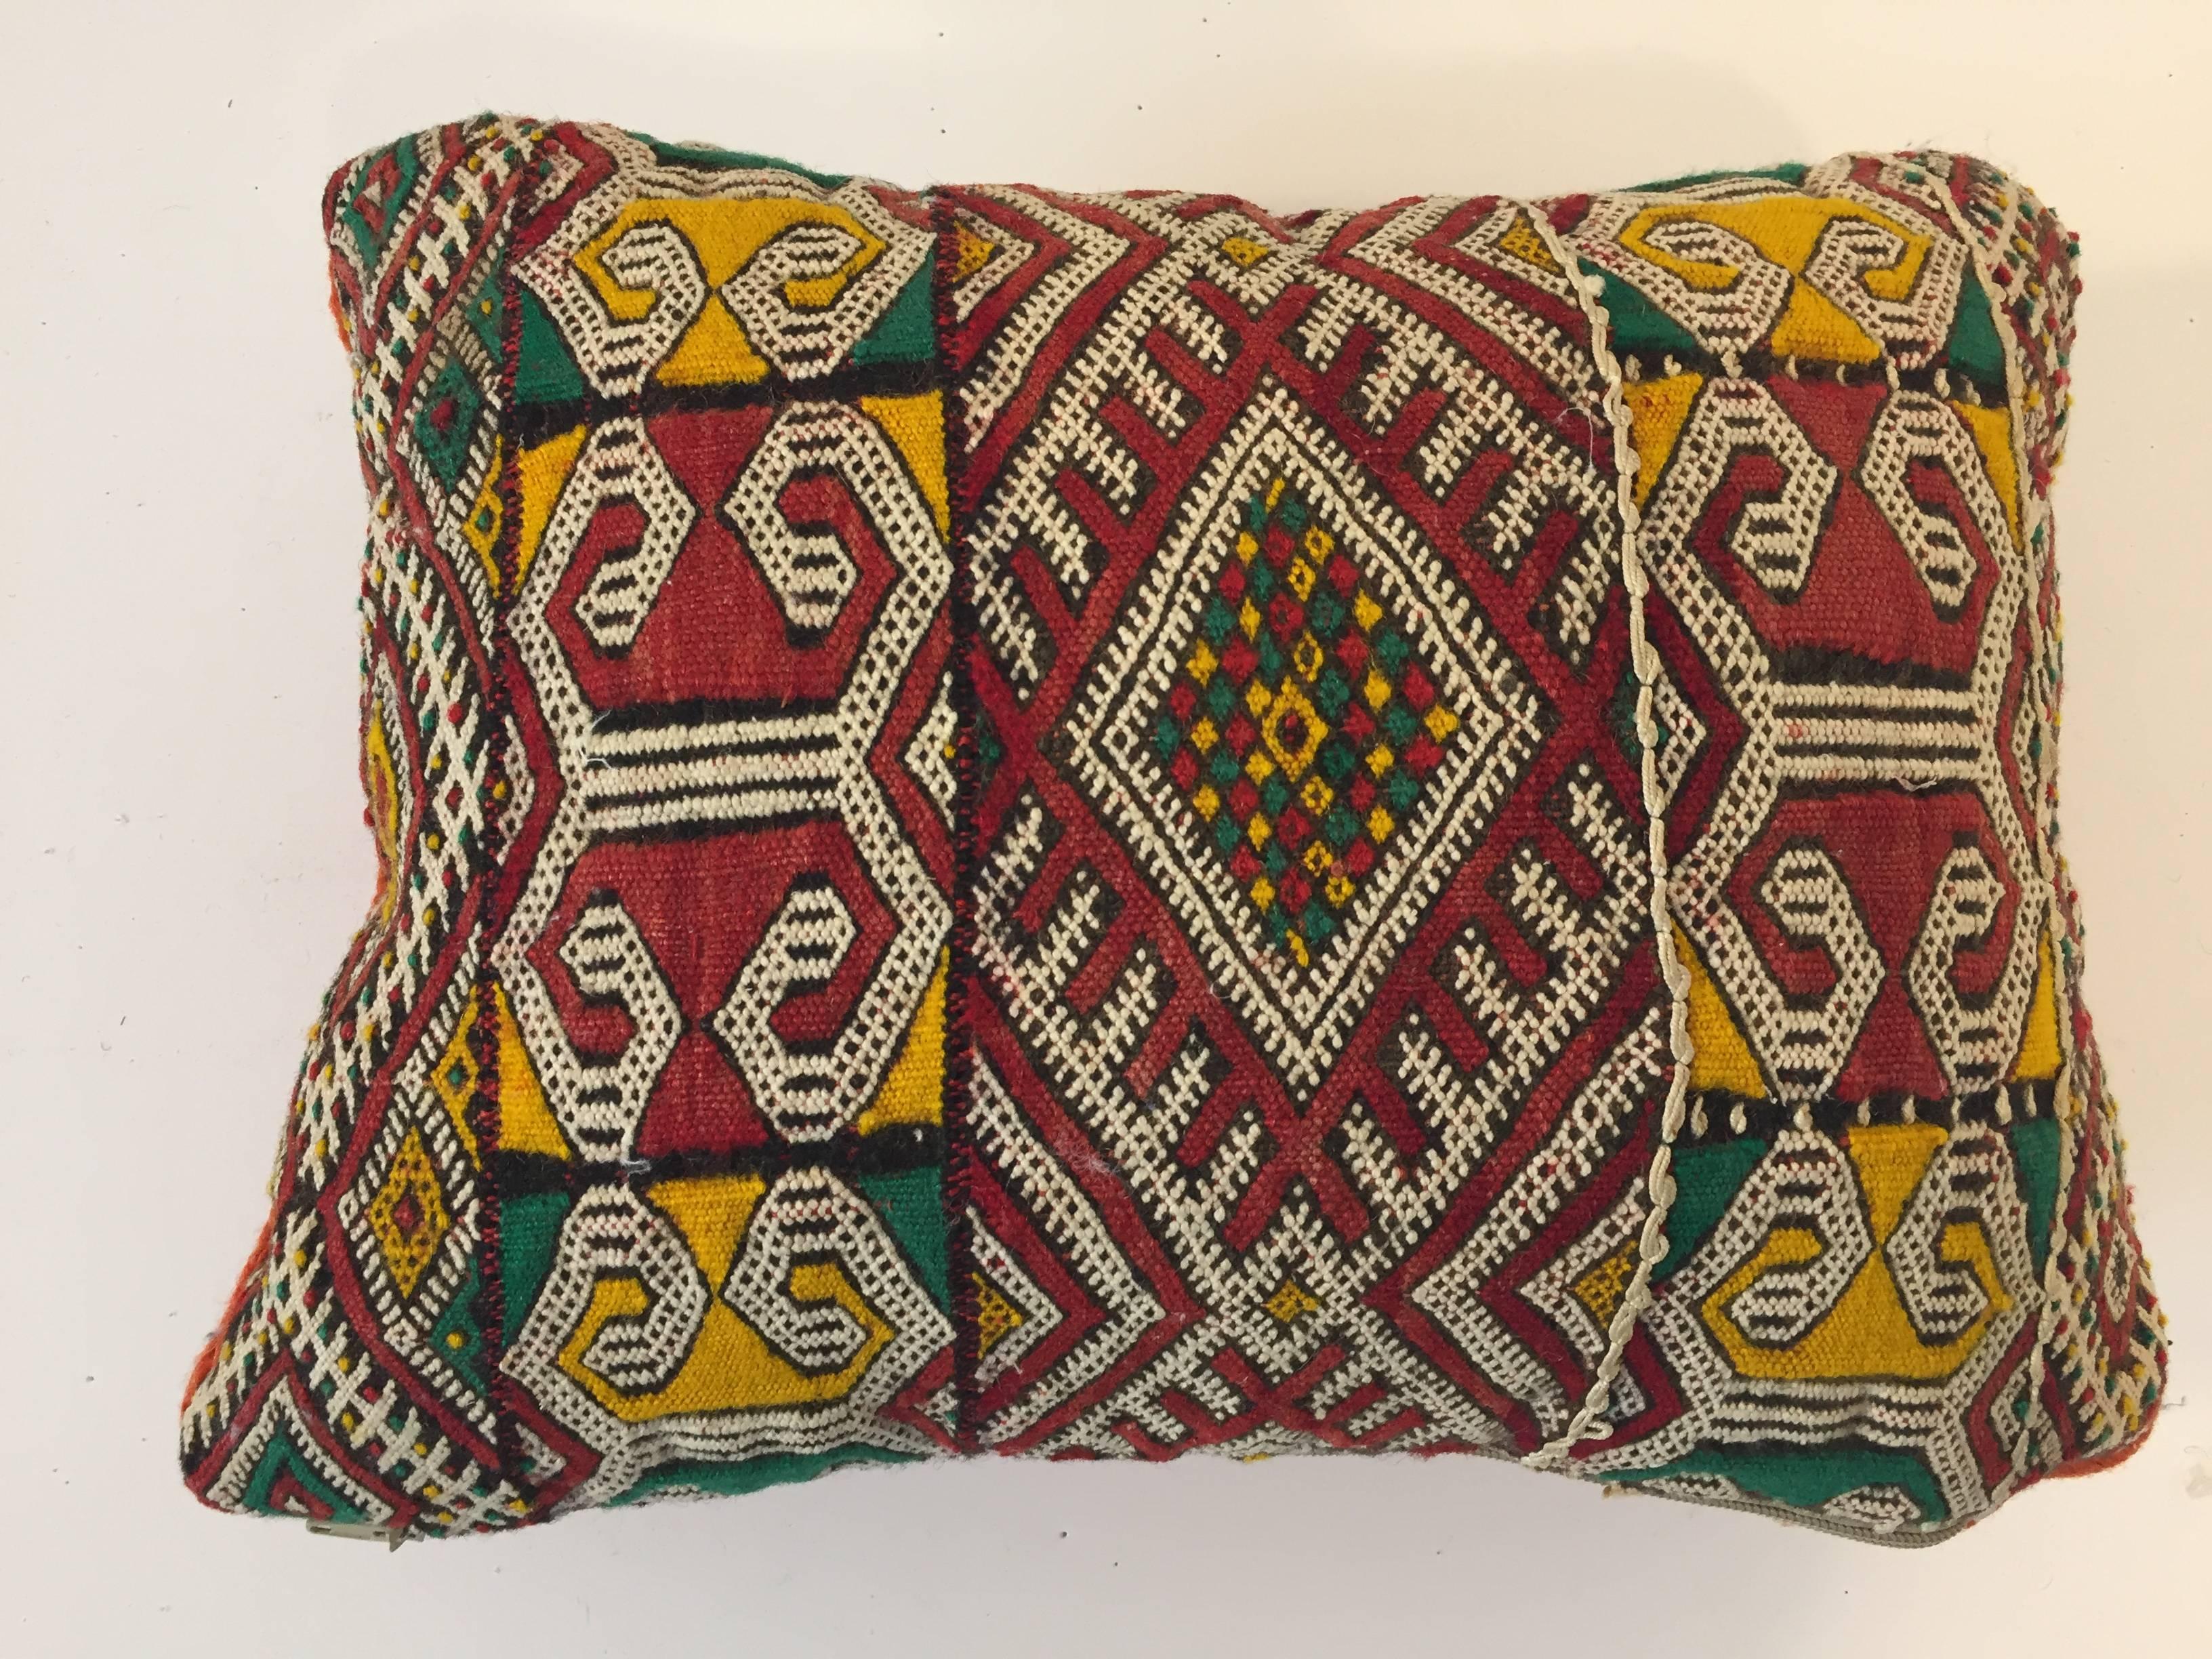 20th Century Berber Tribal Moroccan Pillow with African Designs